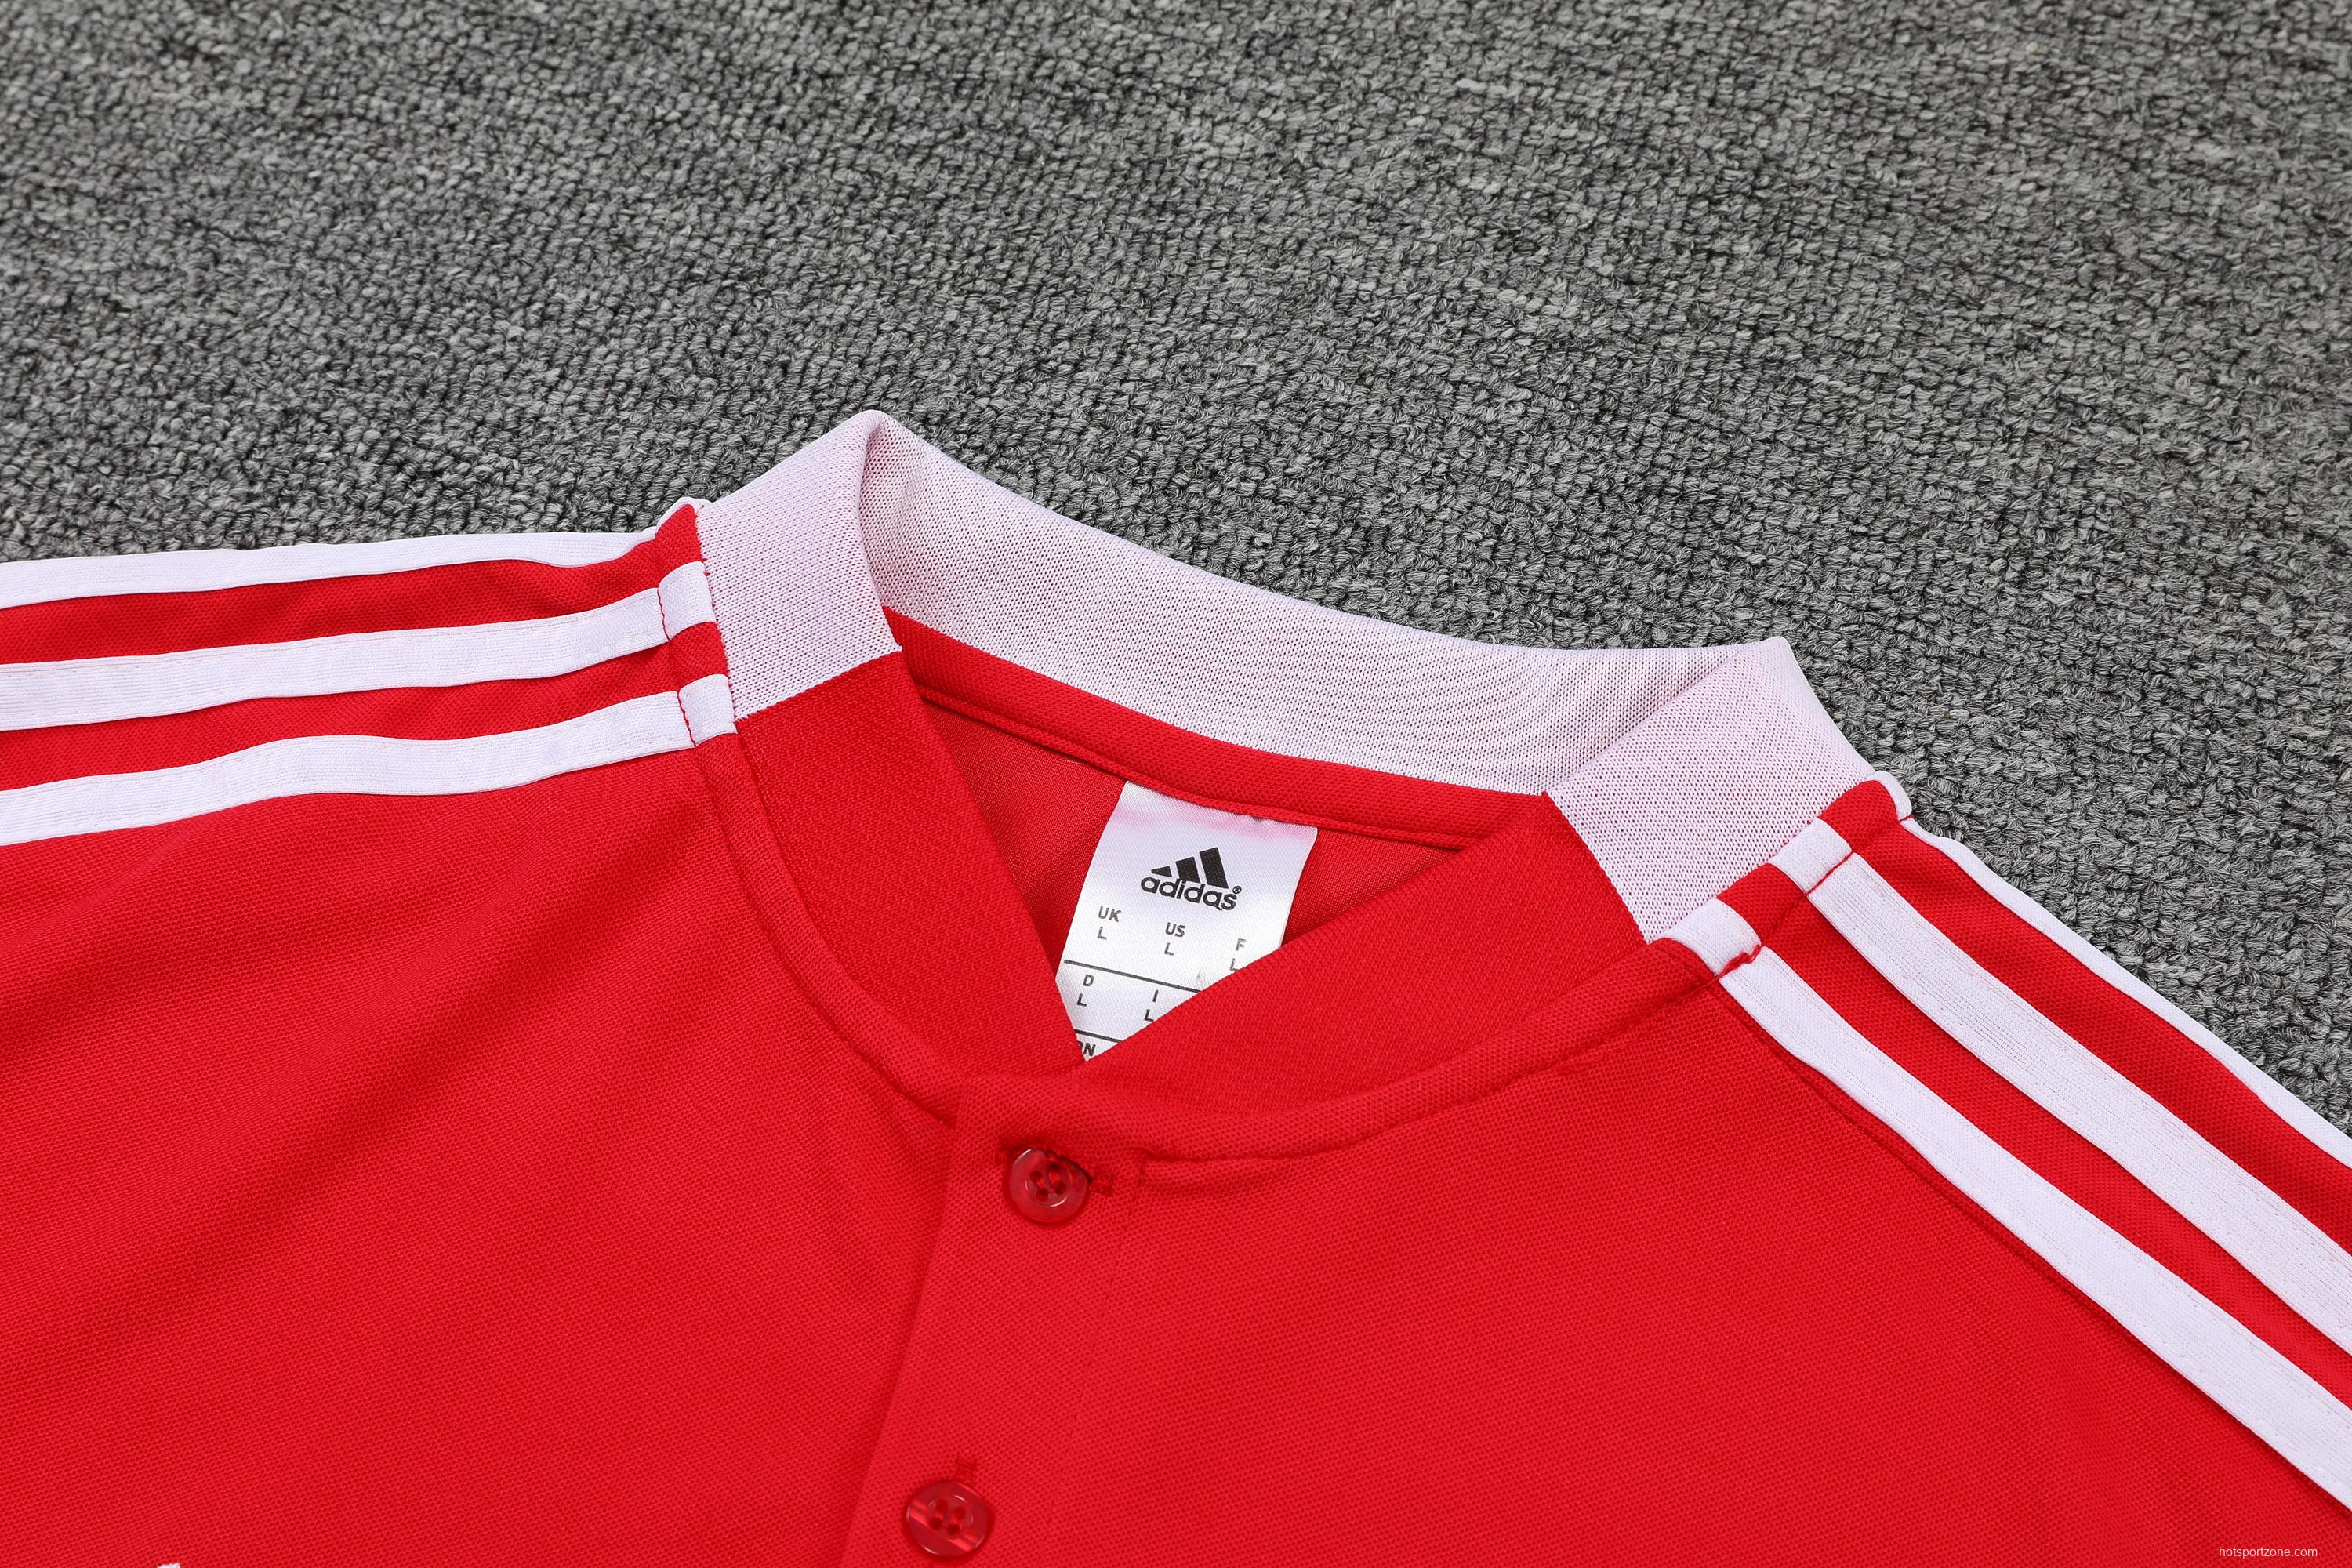 Ajax POLO kit Red (not supported to be sold separately)